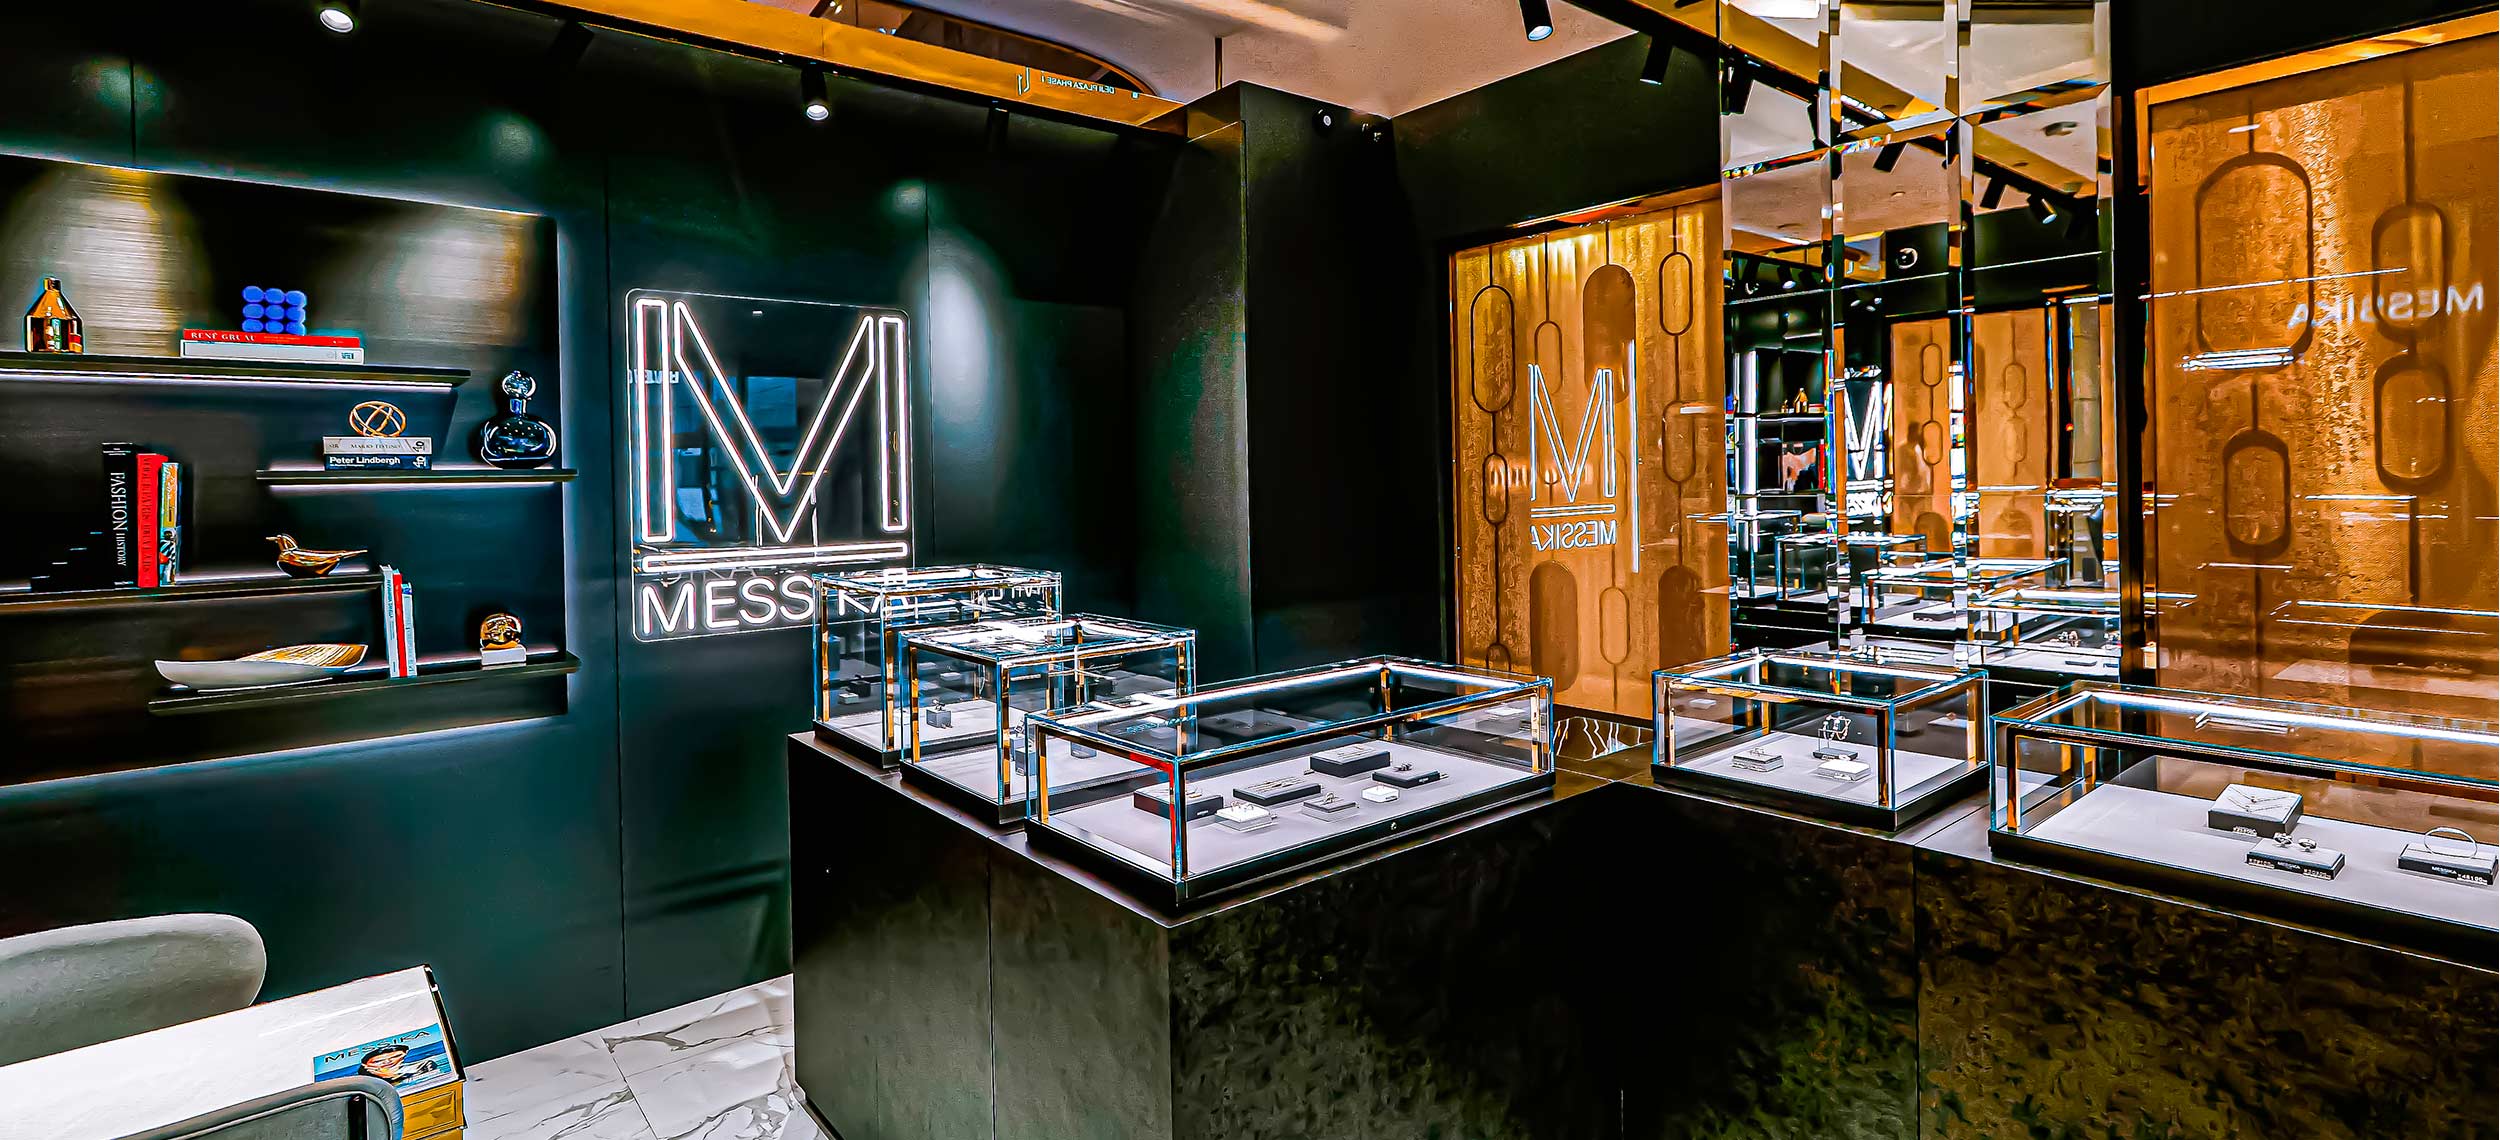 Boutique Pop-up Messika